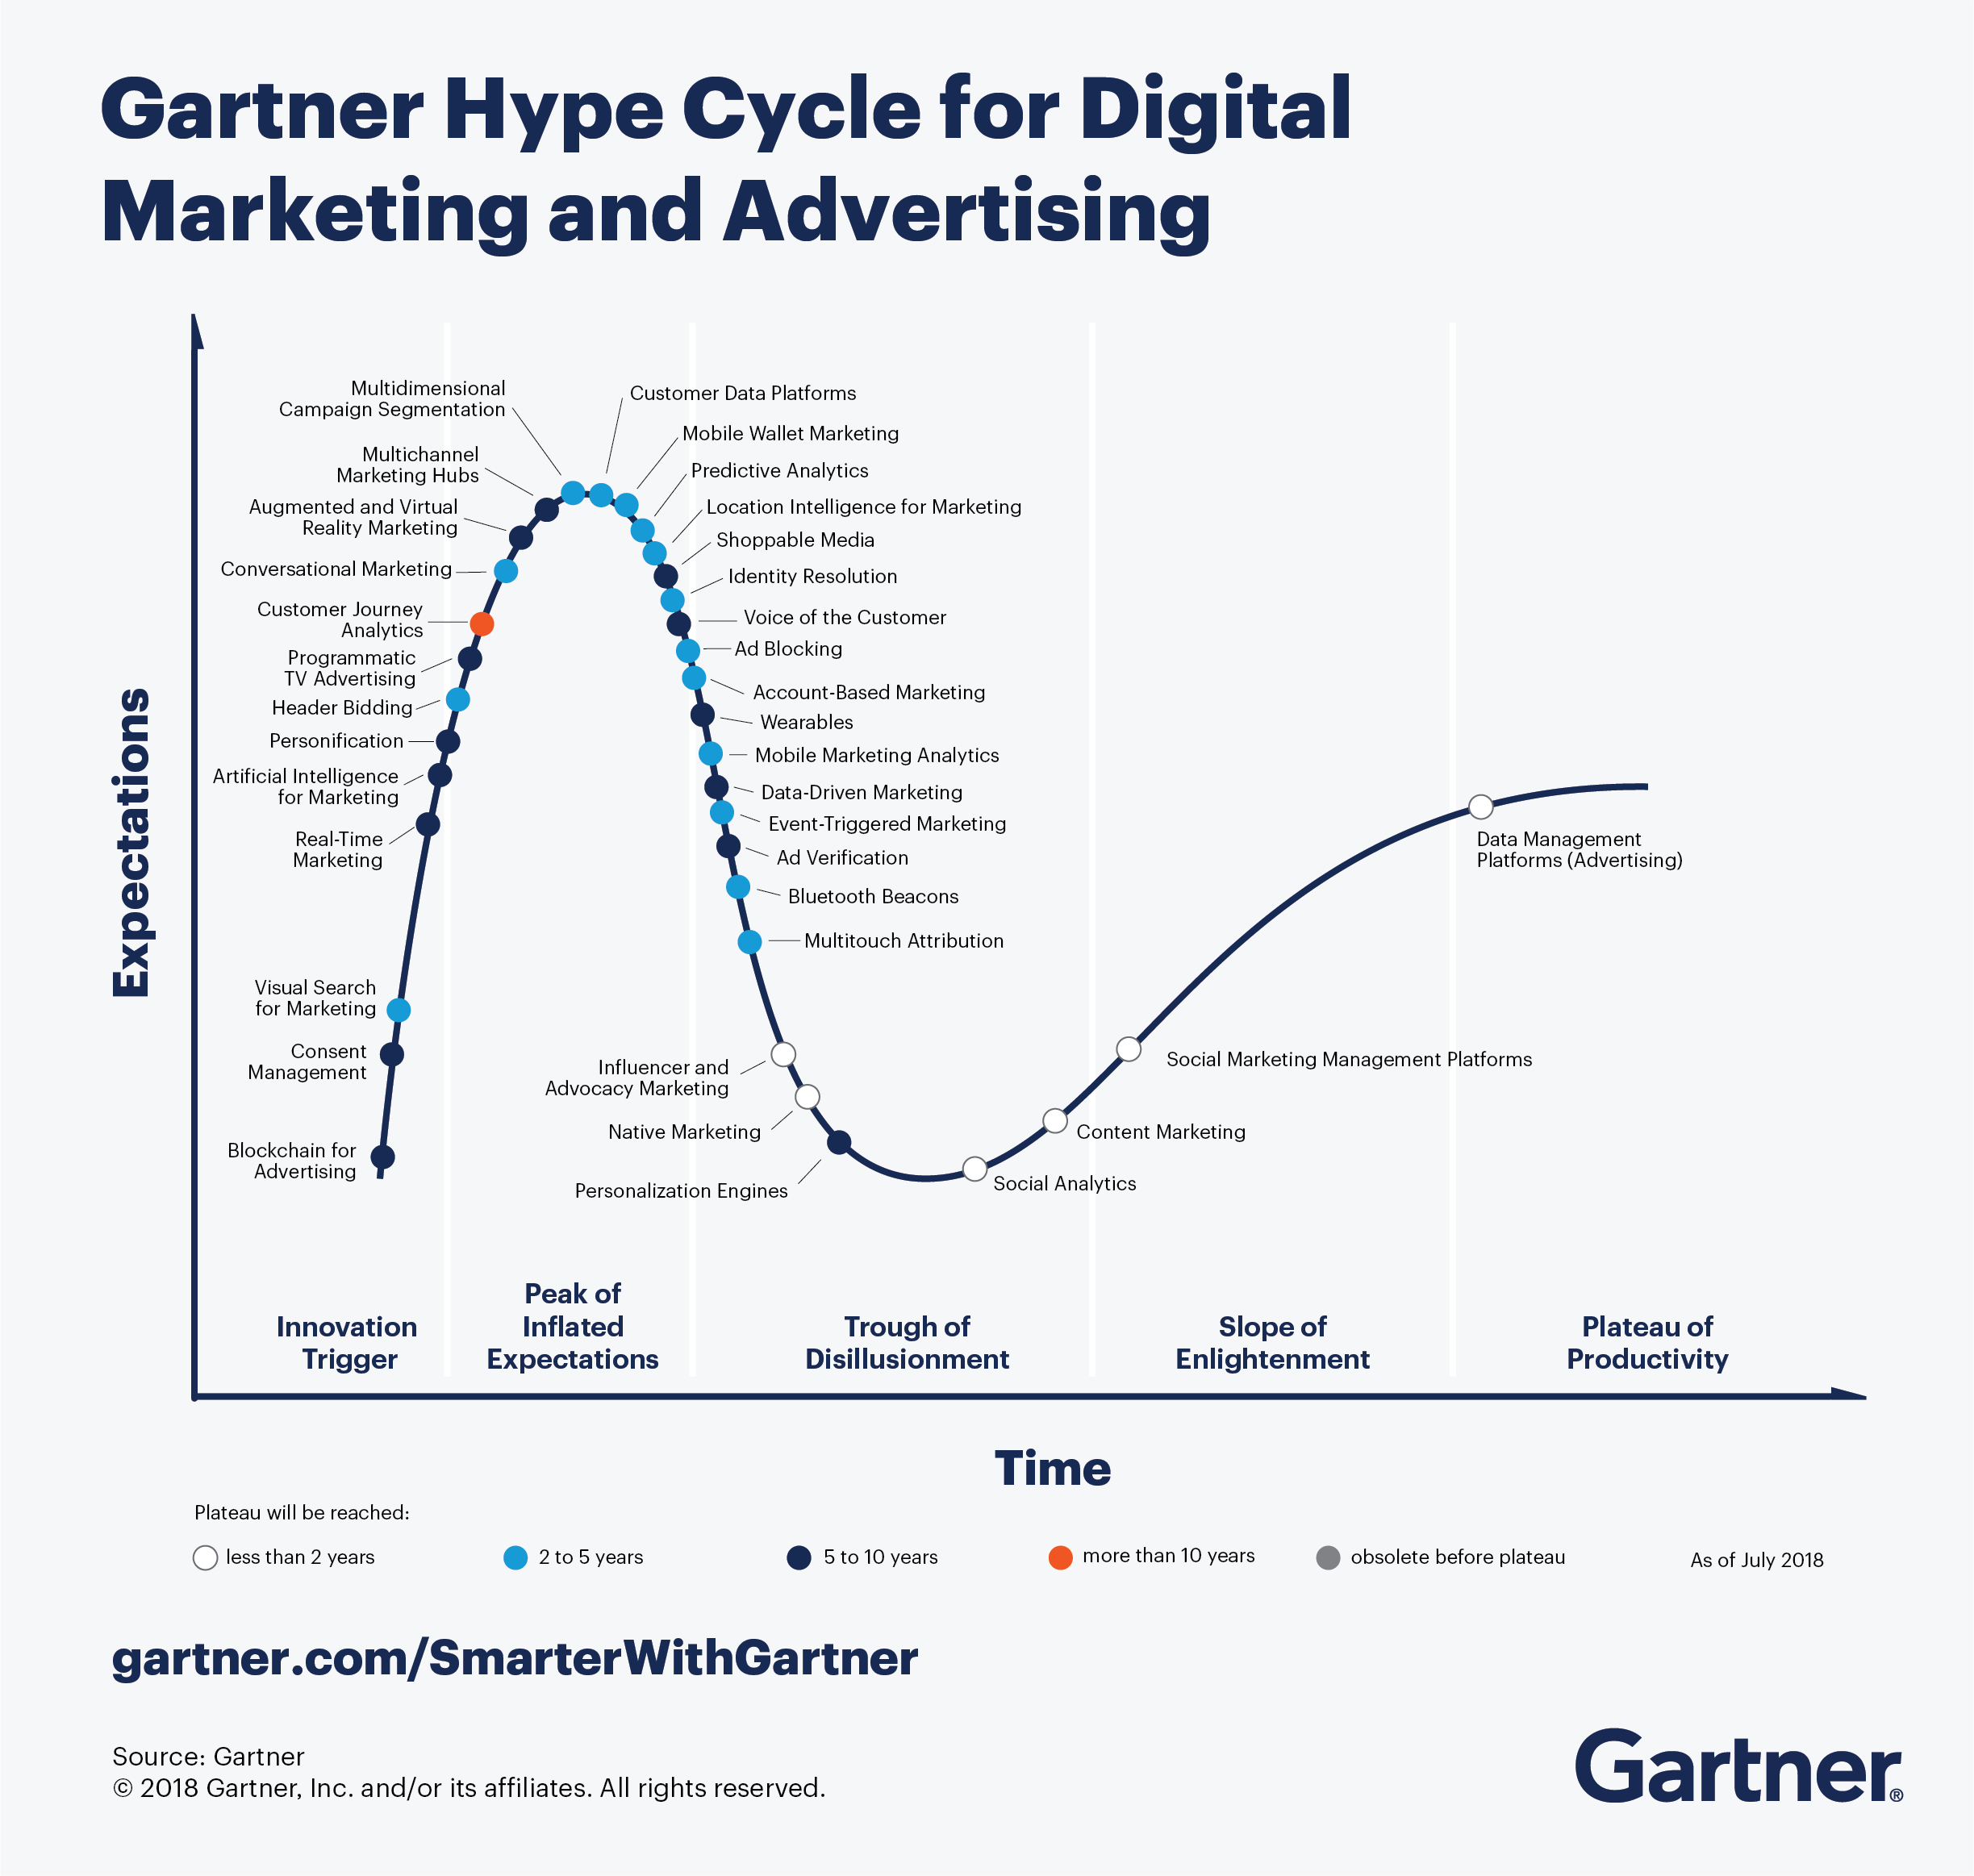 Gartner Hype Cycle for Digital Marketing and Advertising